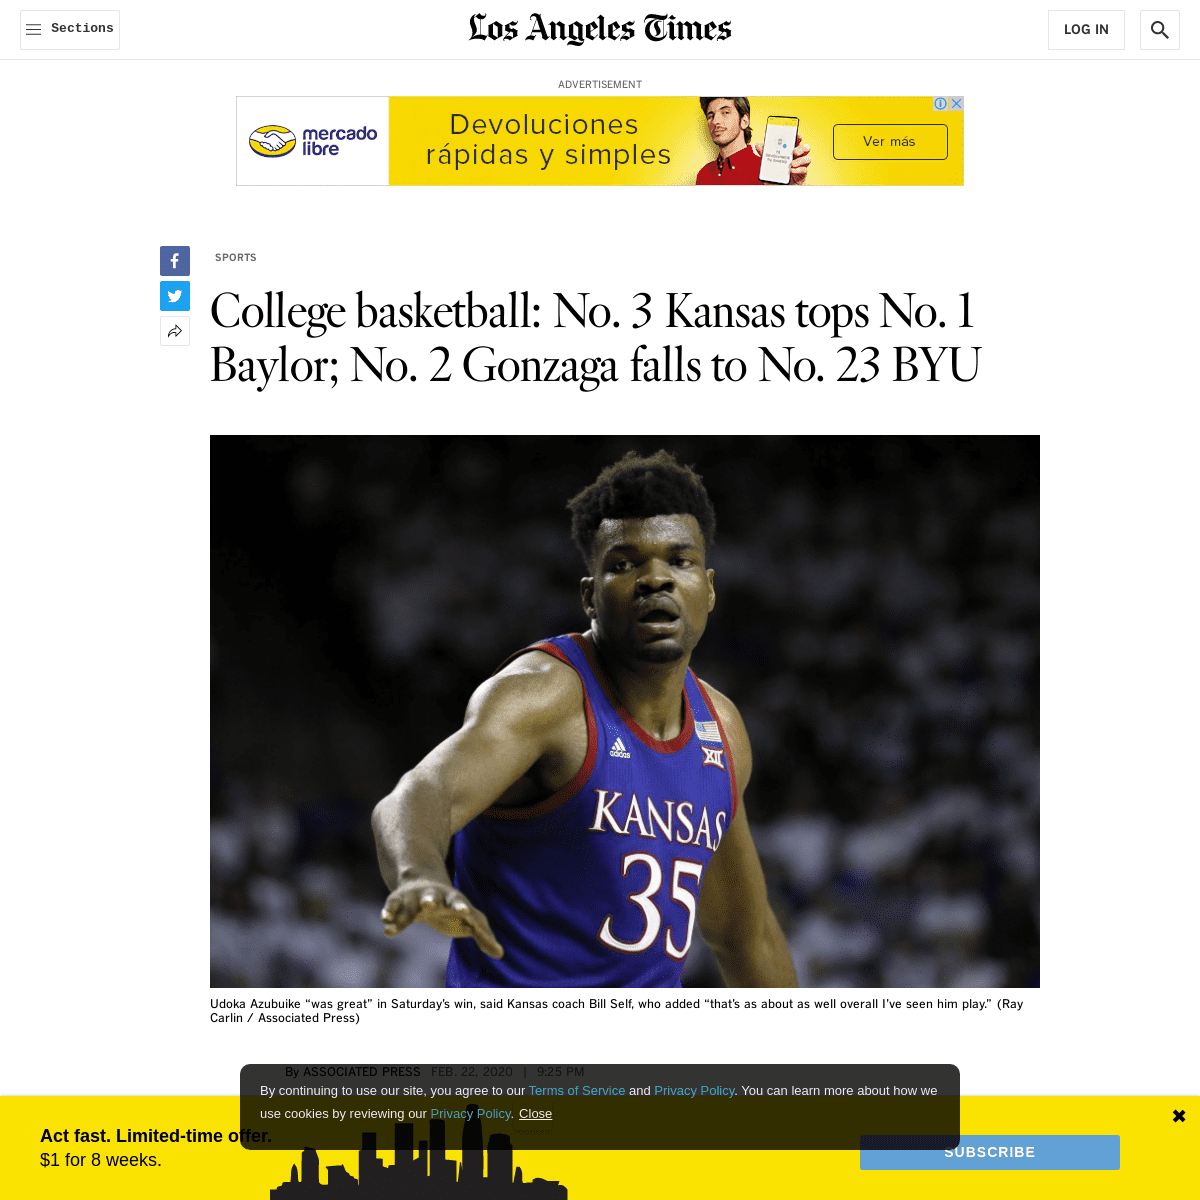 A complete backup of www.latimes.com/sports/story/2020-02-22/college-basketball-no-3-kansas-prevails-at-no-1-baylor